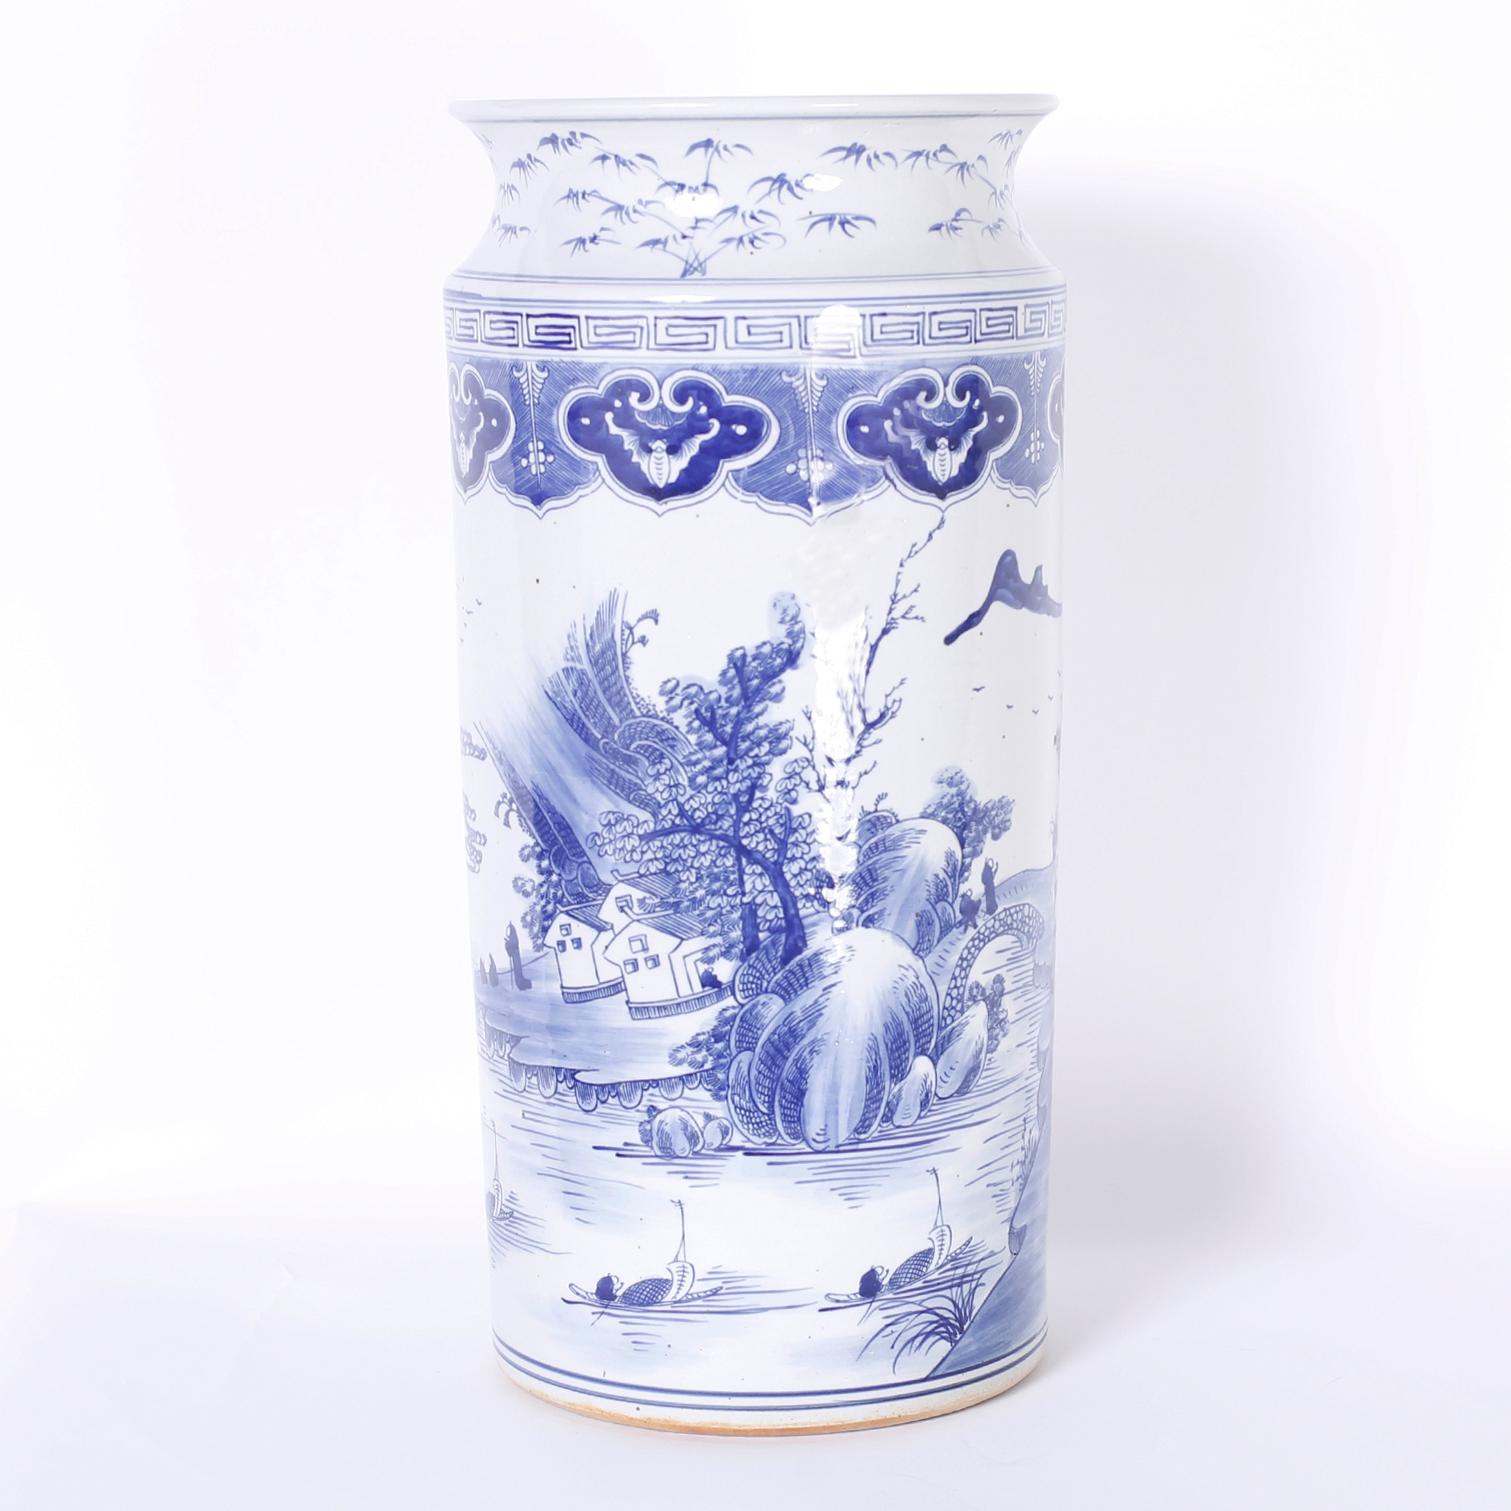 Unusual Chinese blue and white porcelain umbrella stand hand decorated with landscapes depicting trees, buildings, and waterways.